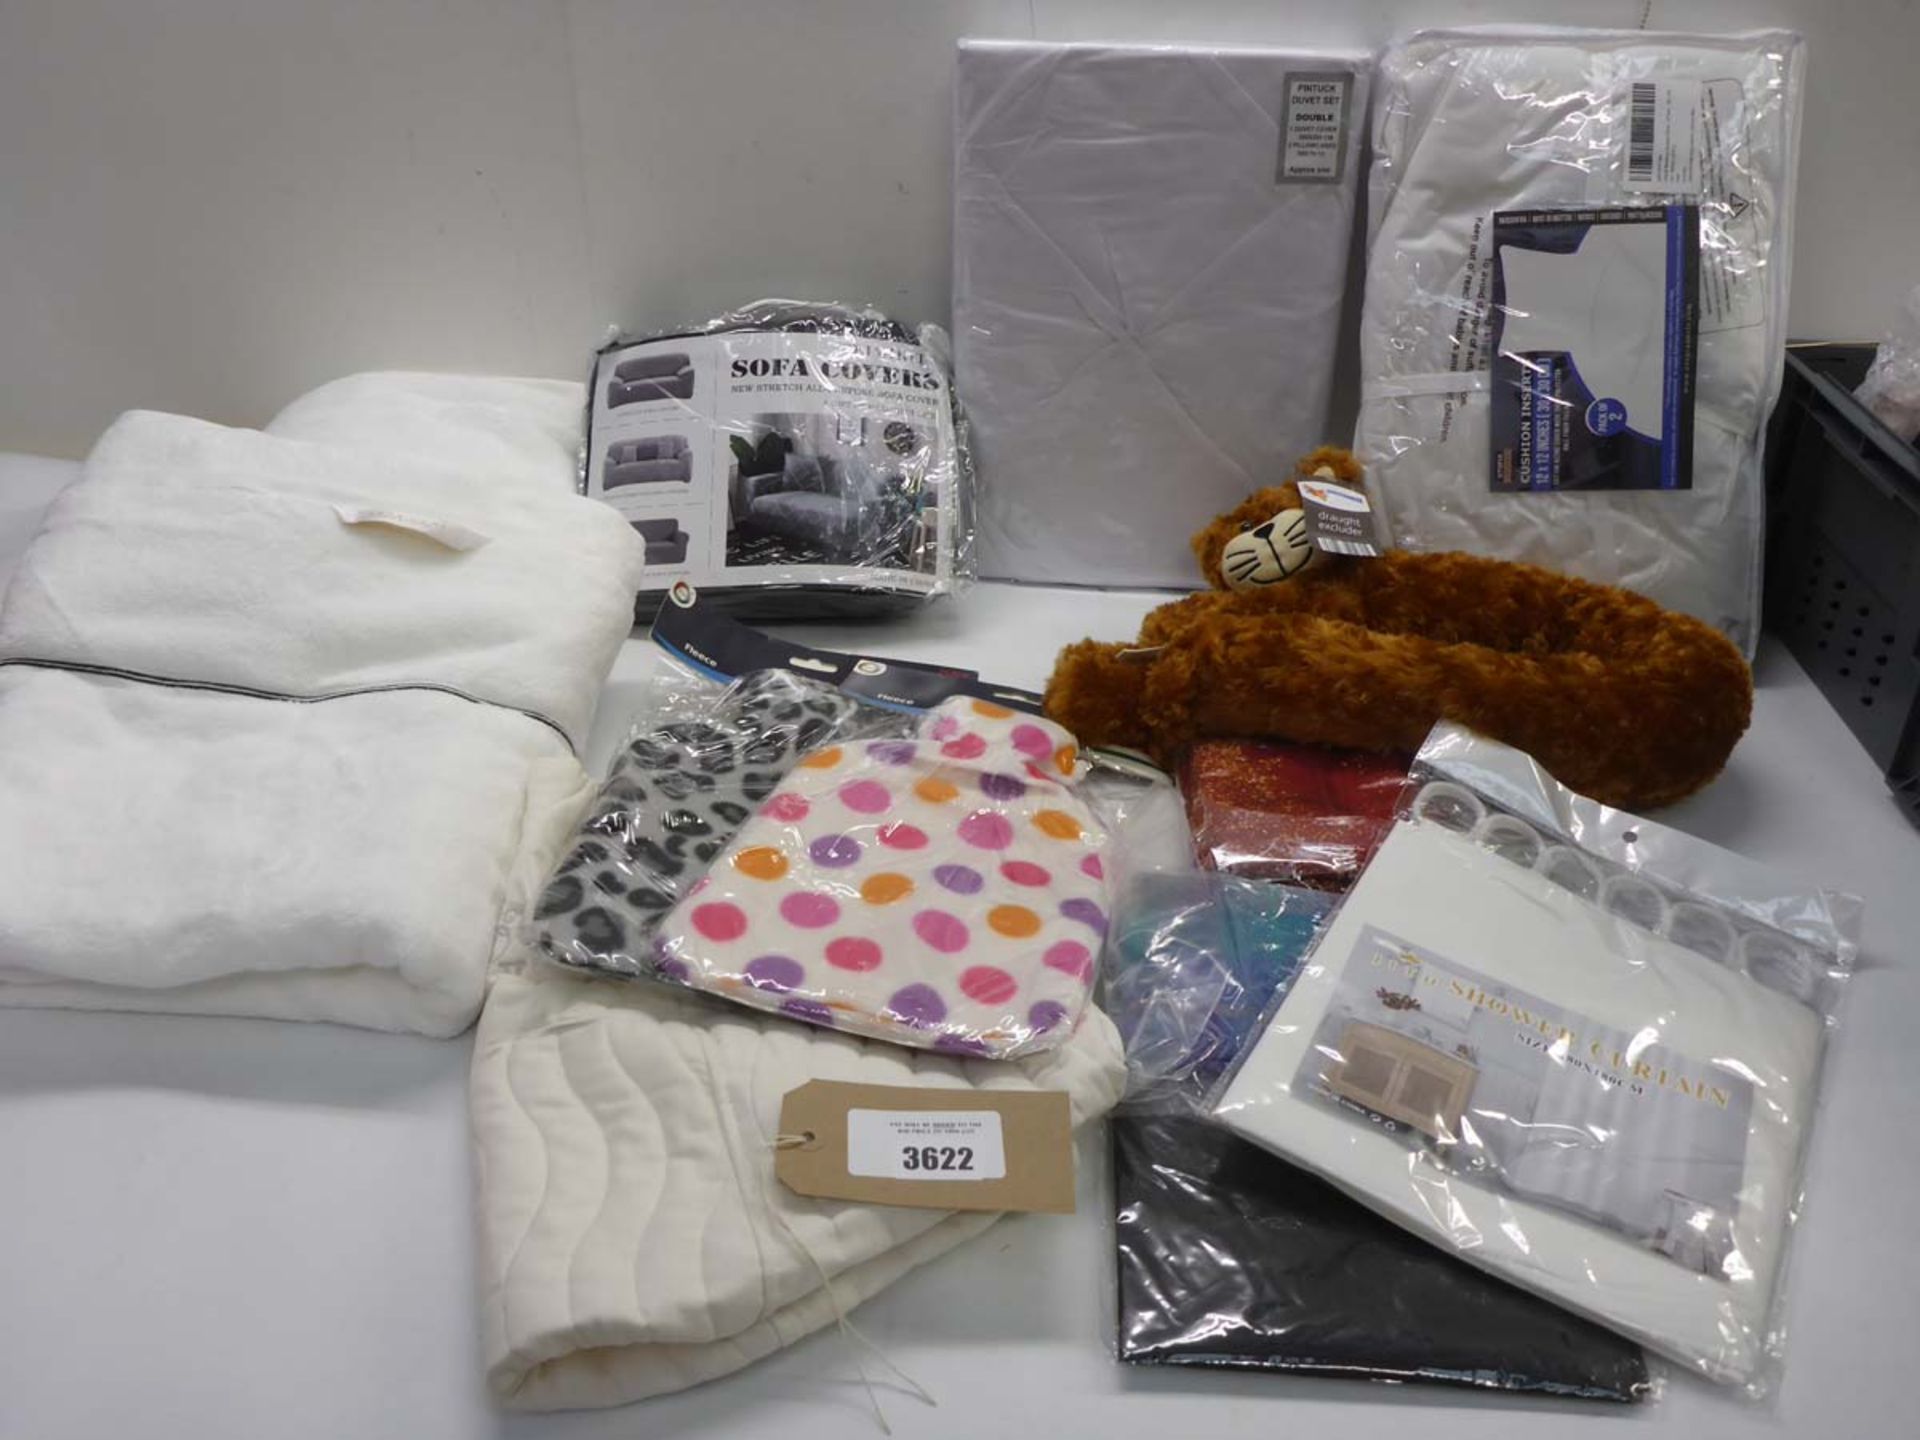 Double duvet set, square cushion, bath sheets, sofa cover, hot water bottles, draught excluder,